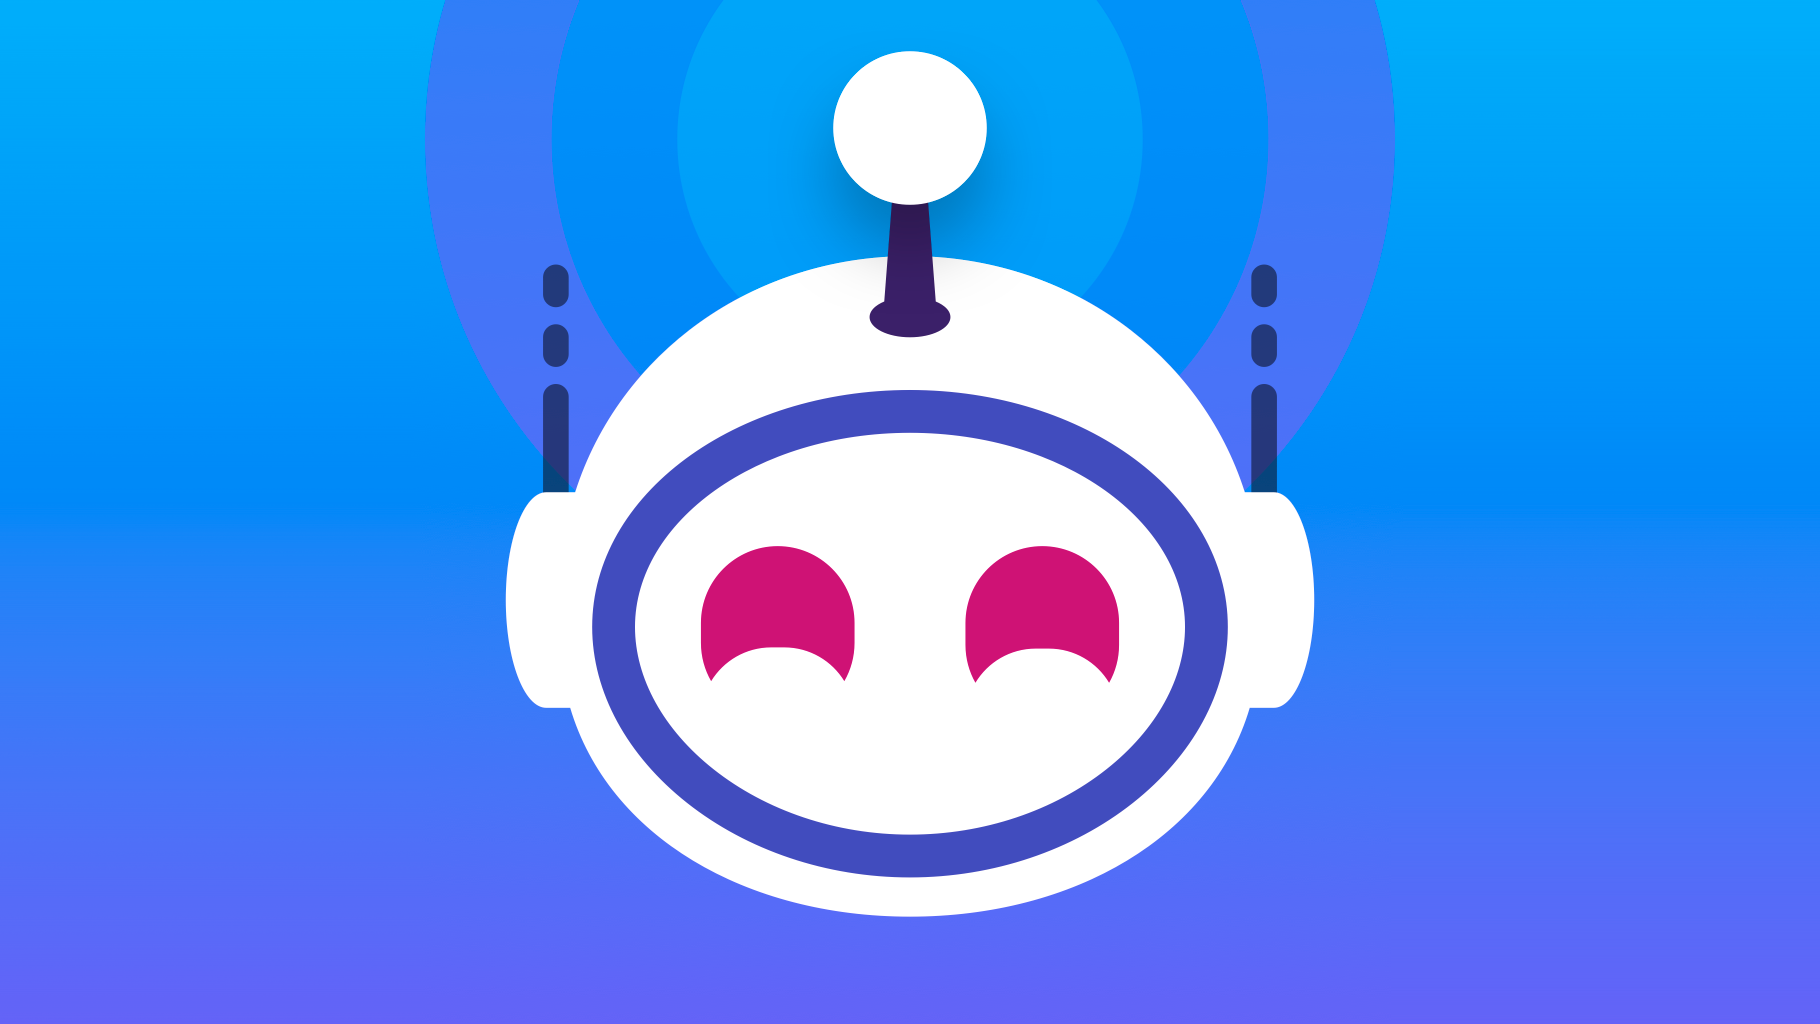 Reddit App ‘Apollo’ Gets Major Update With New Notification Experience